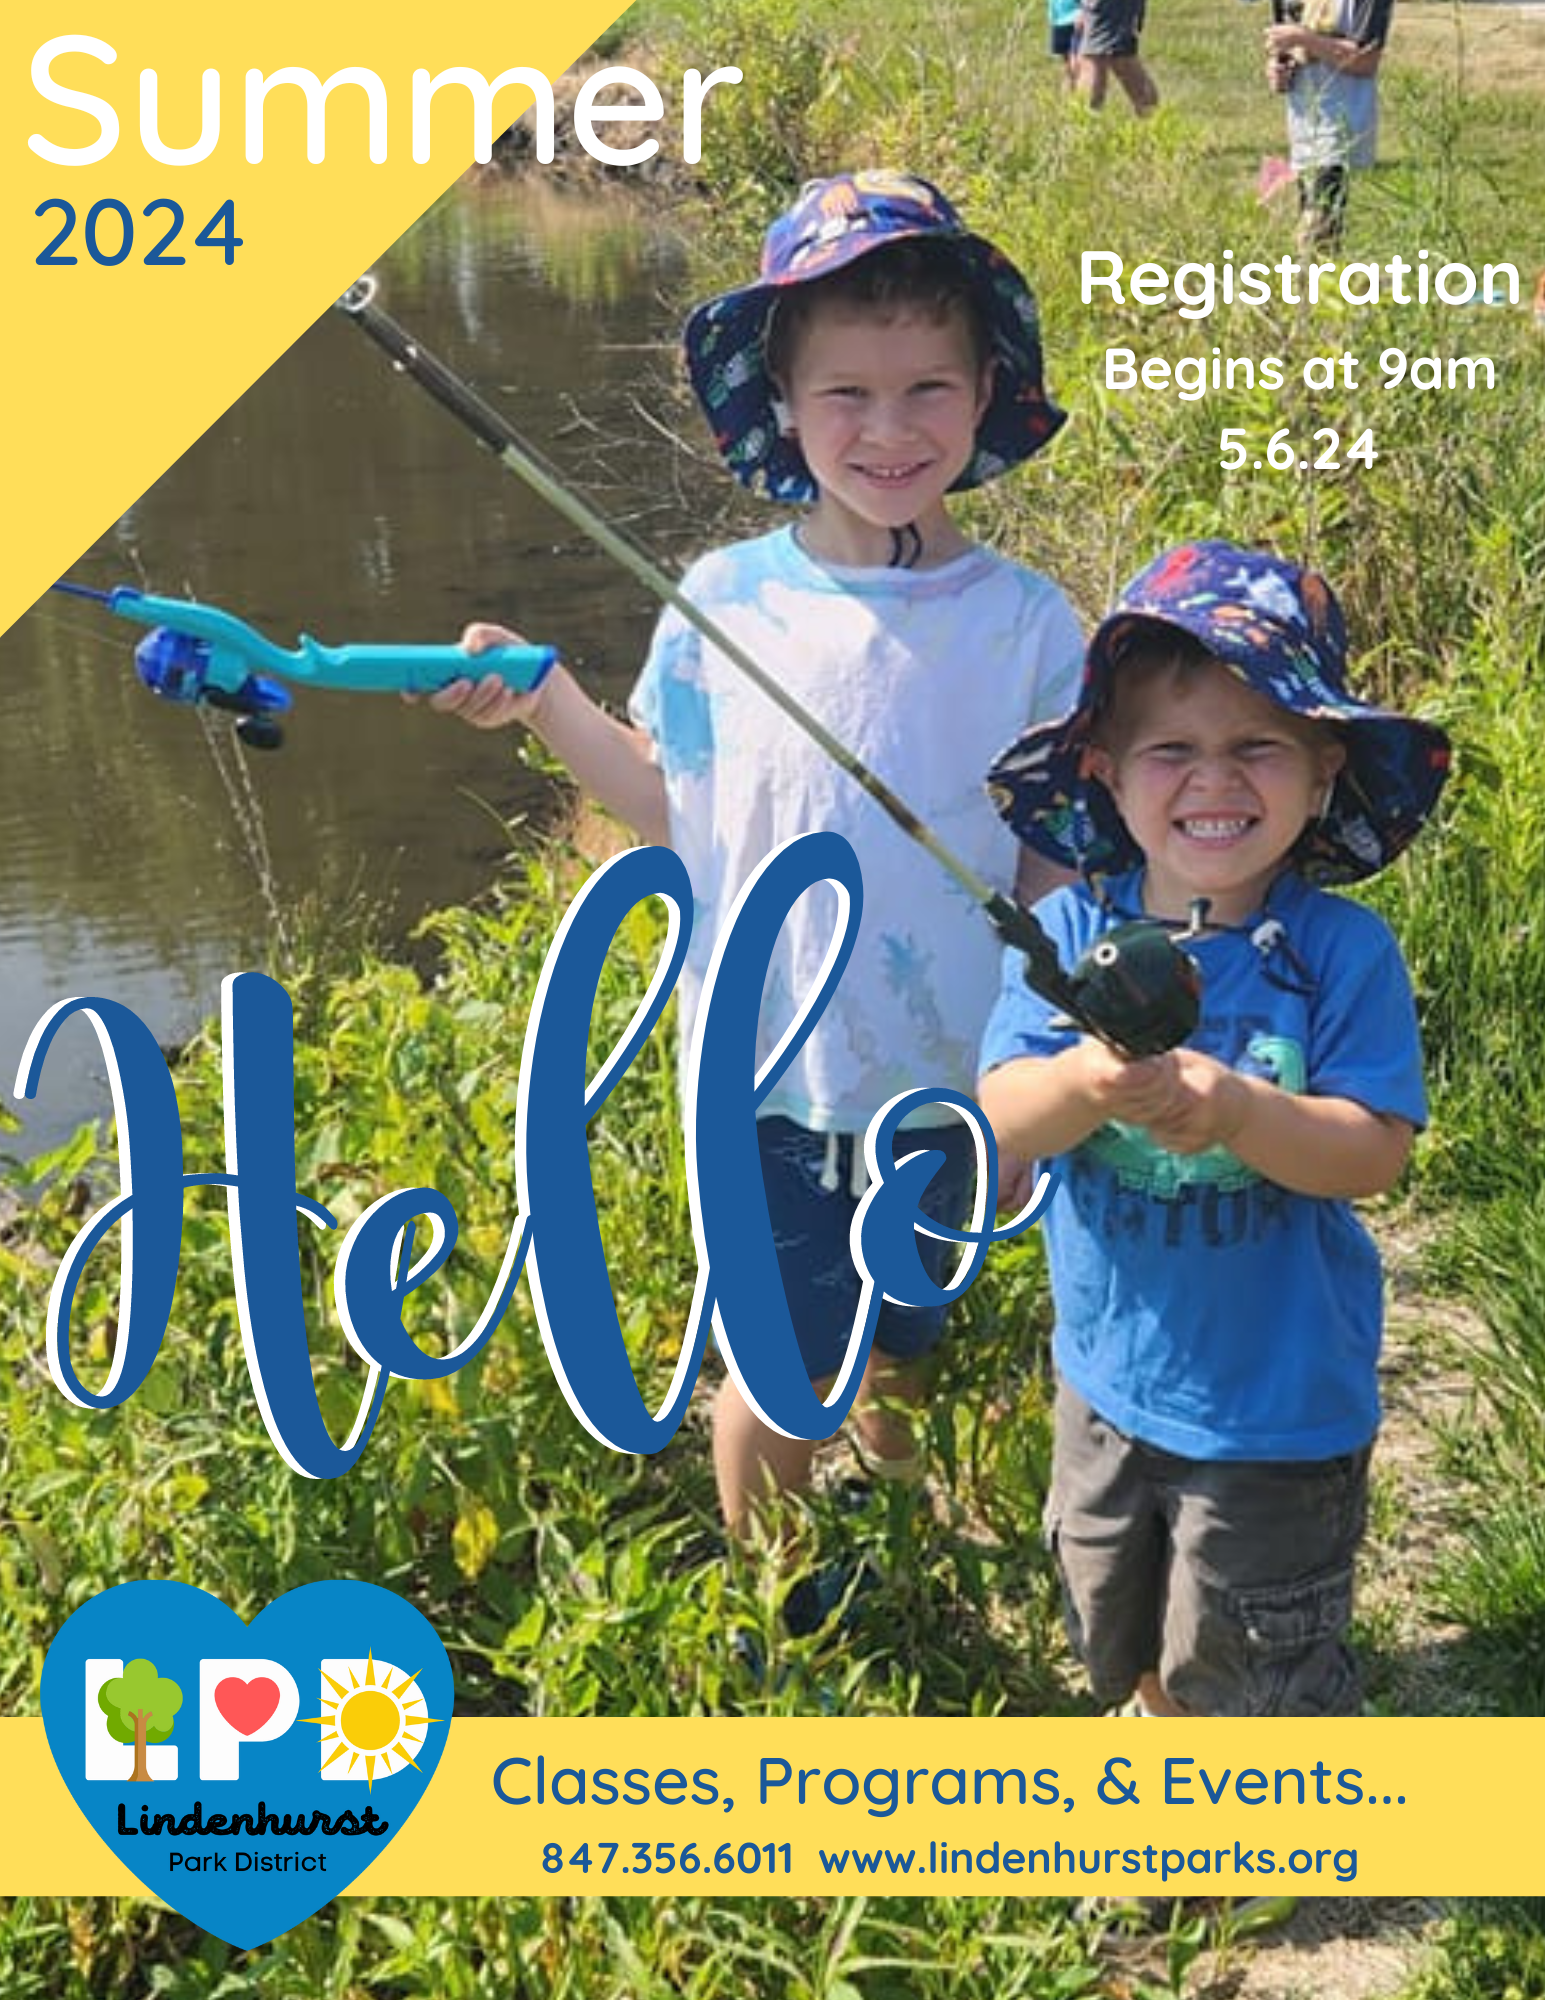 An advertisement for a summer event in 2024 by the Lindenhurst Park District. The poster is colorful with a prominent "Hello Summer 2024" greeting. It features two young children, smiling and holding fishing rods, standing by a body of water. A "click here" call-to-action bubble suggests an interactive element, likely for online viewers. Registration information is provided, stating it begins at 9 am on May 6, 2024. Contact details include a phone number and website, reinforcing the poster's purpose as an informative promotion for summer classes, programs, and events. The park district's logo, incorporating trees and sun imagery, is displayed at the bottom alongside a heart symbol.